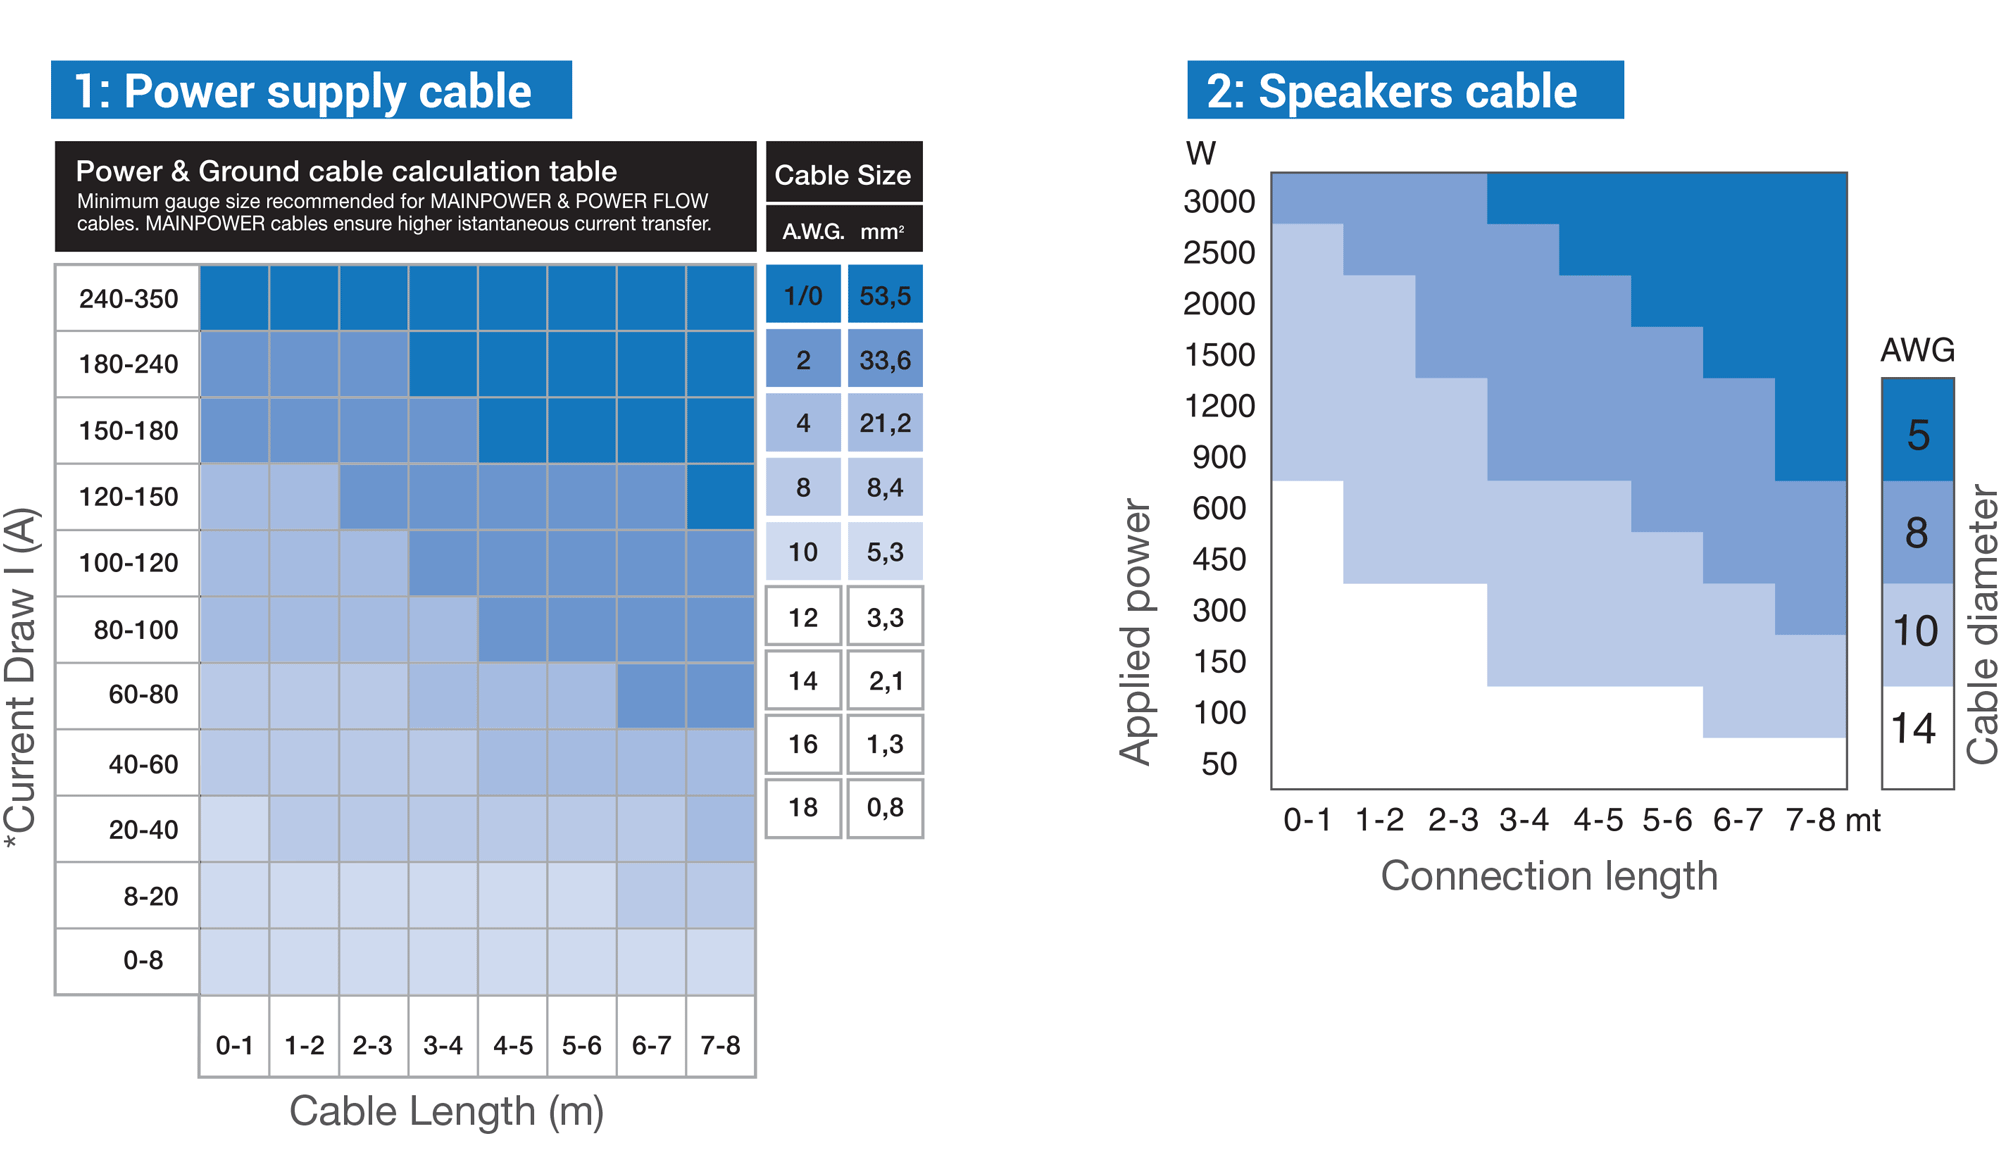 cablesizecalculationtable_4.png